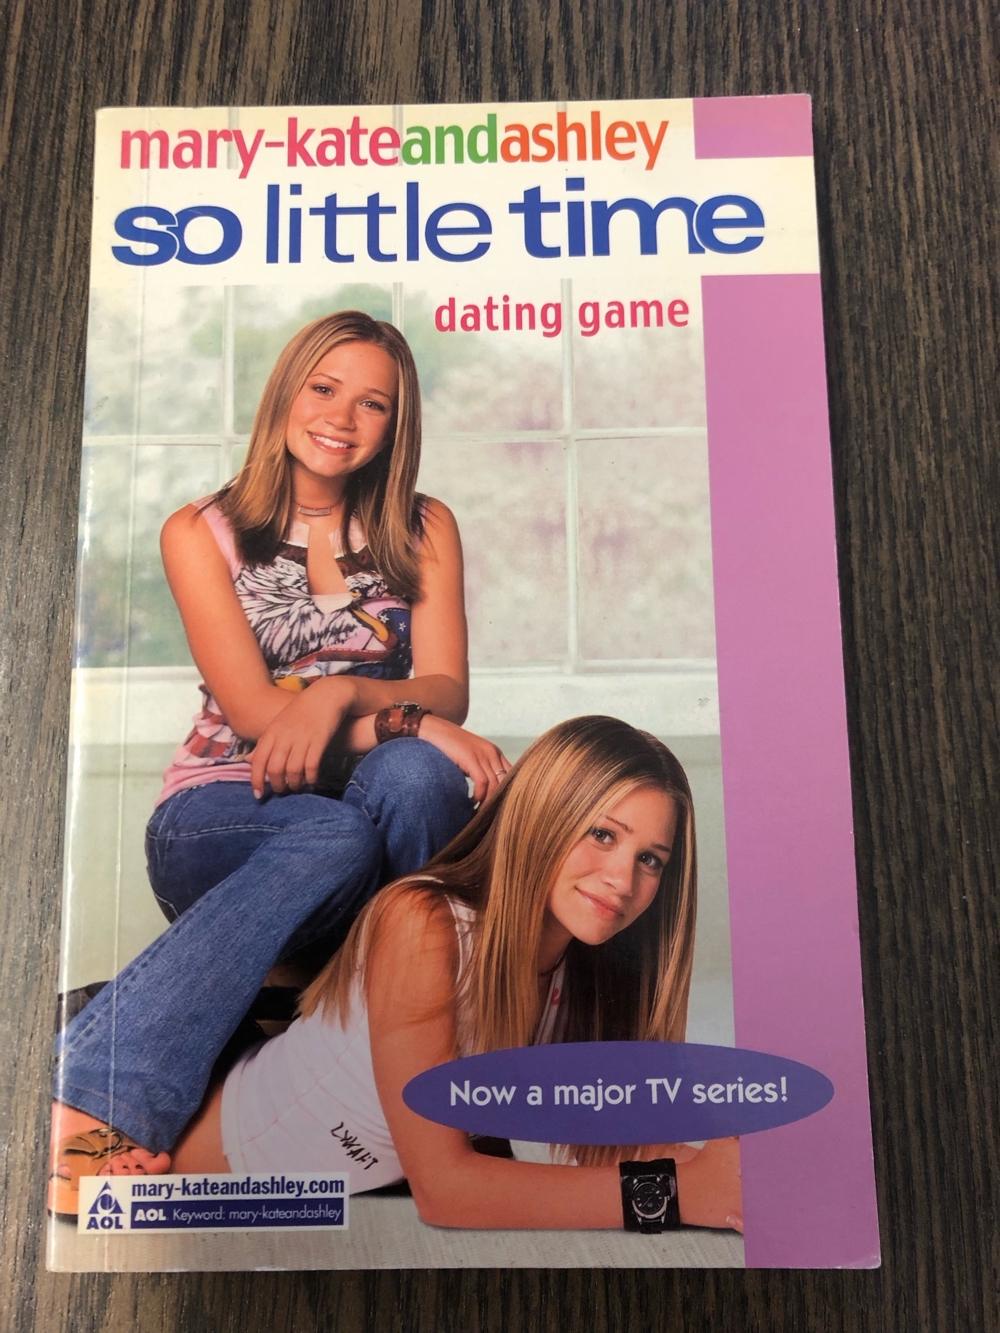 So little time - dating game